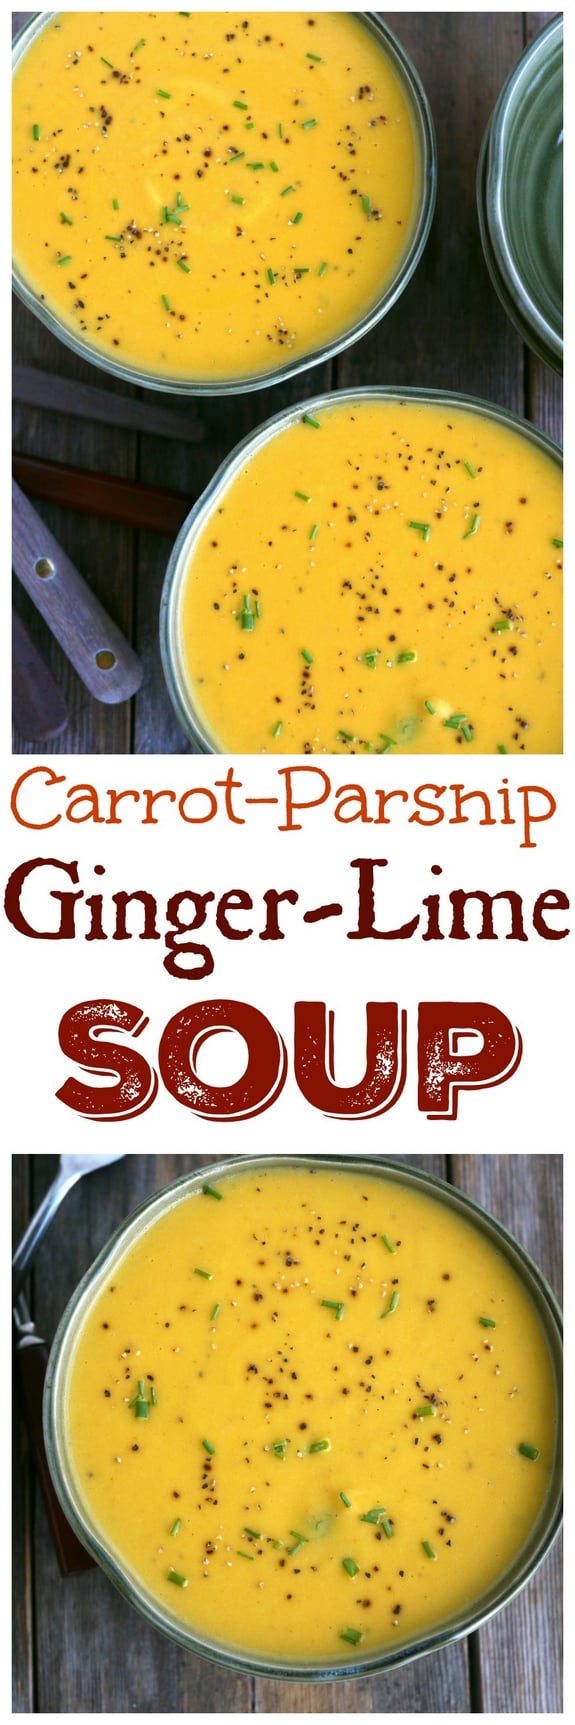 Carrot Parsnip Ginger Lime Soup